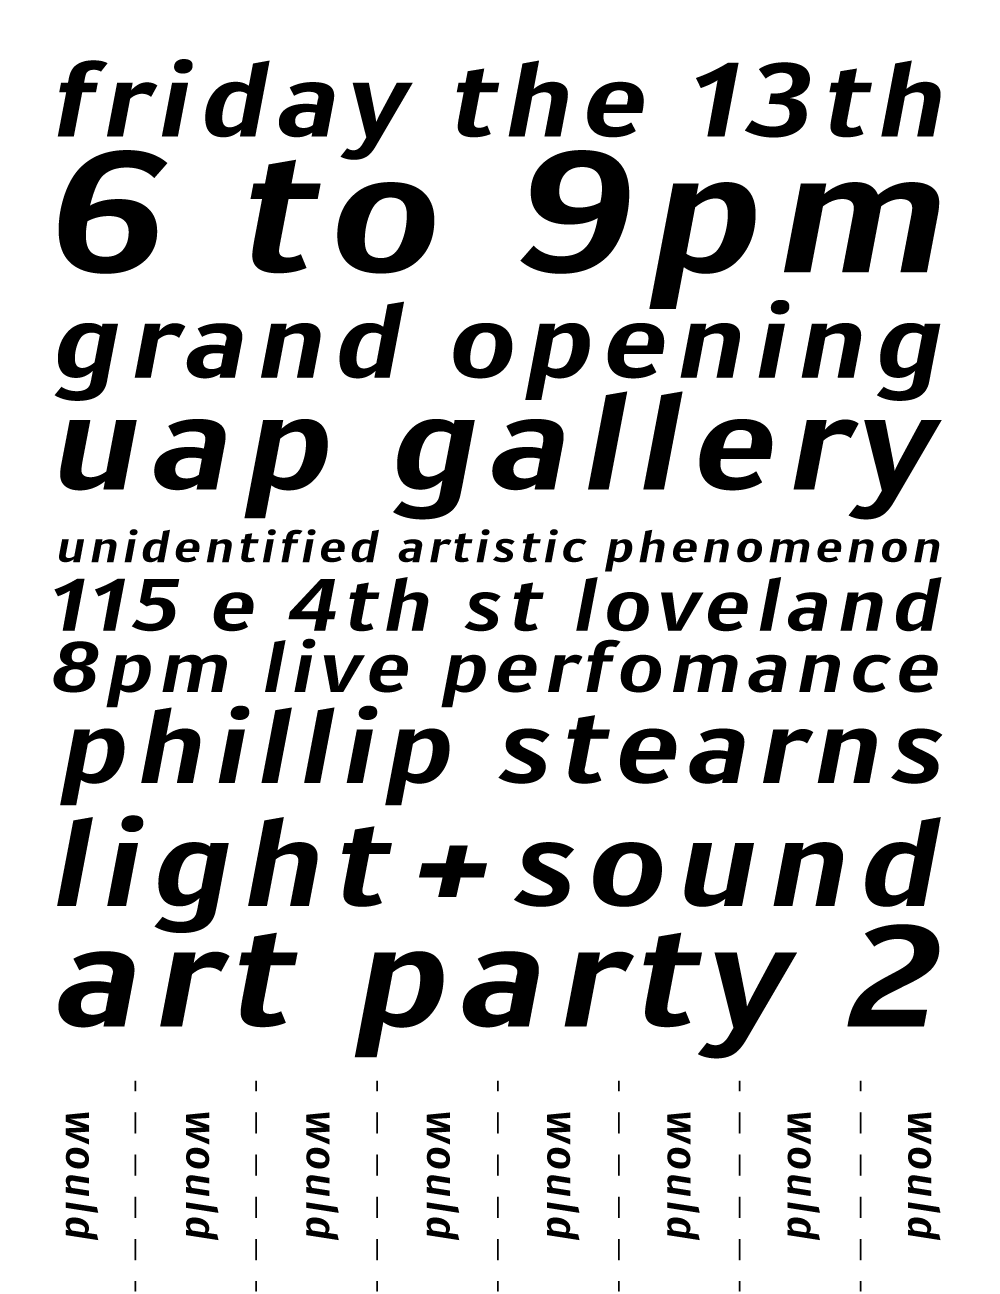 uap gallery Art Party 2 Grand Opening